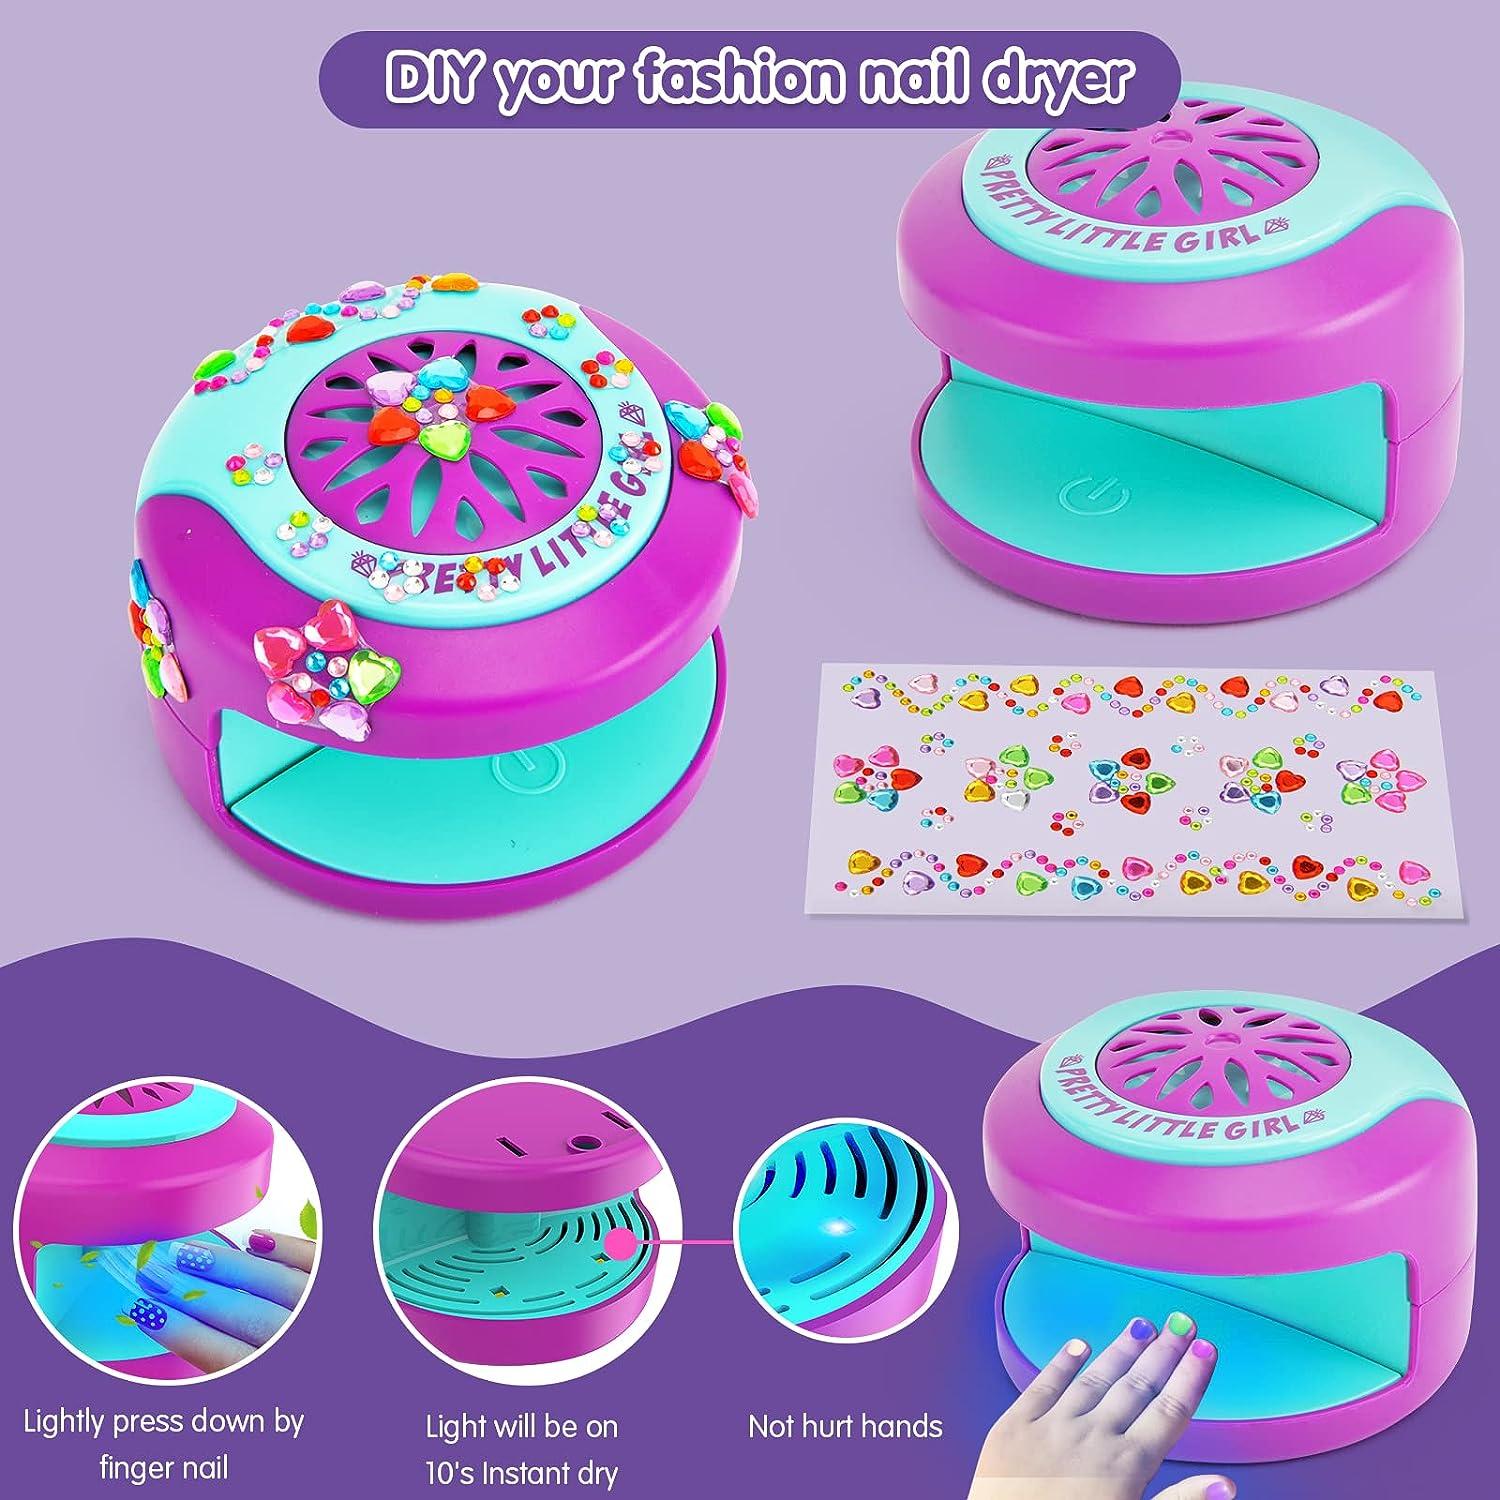 BATTOP Kids Nail Polish Kit for Girls Ages 7-12 Years Old - Nail Art Studio  Set - Cool Girly Gifts with Nail Polish Pen Dryer Sticker Charm Bracelet Making  Kit & Ring